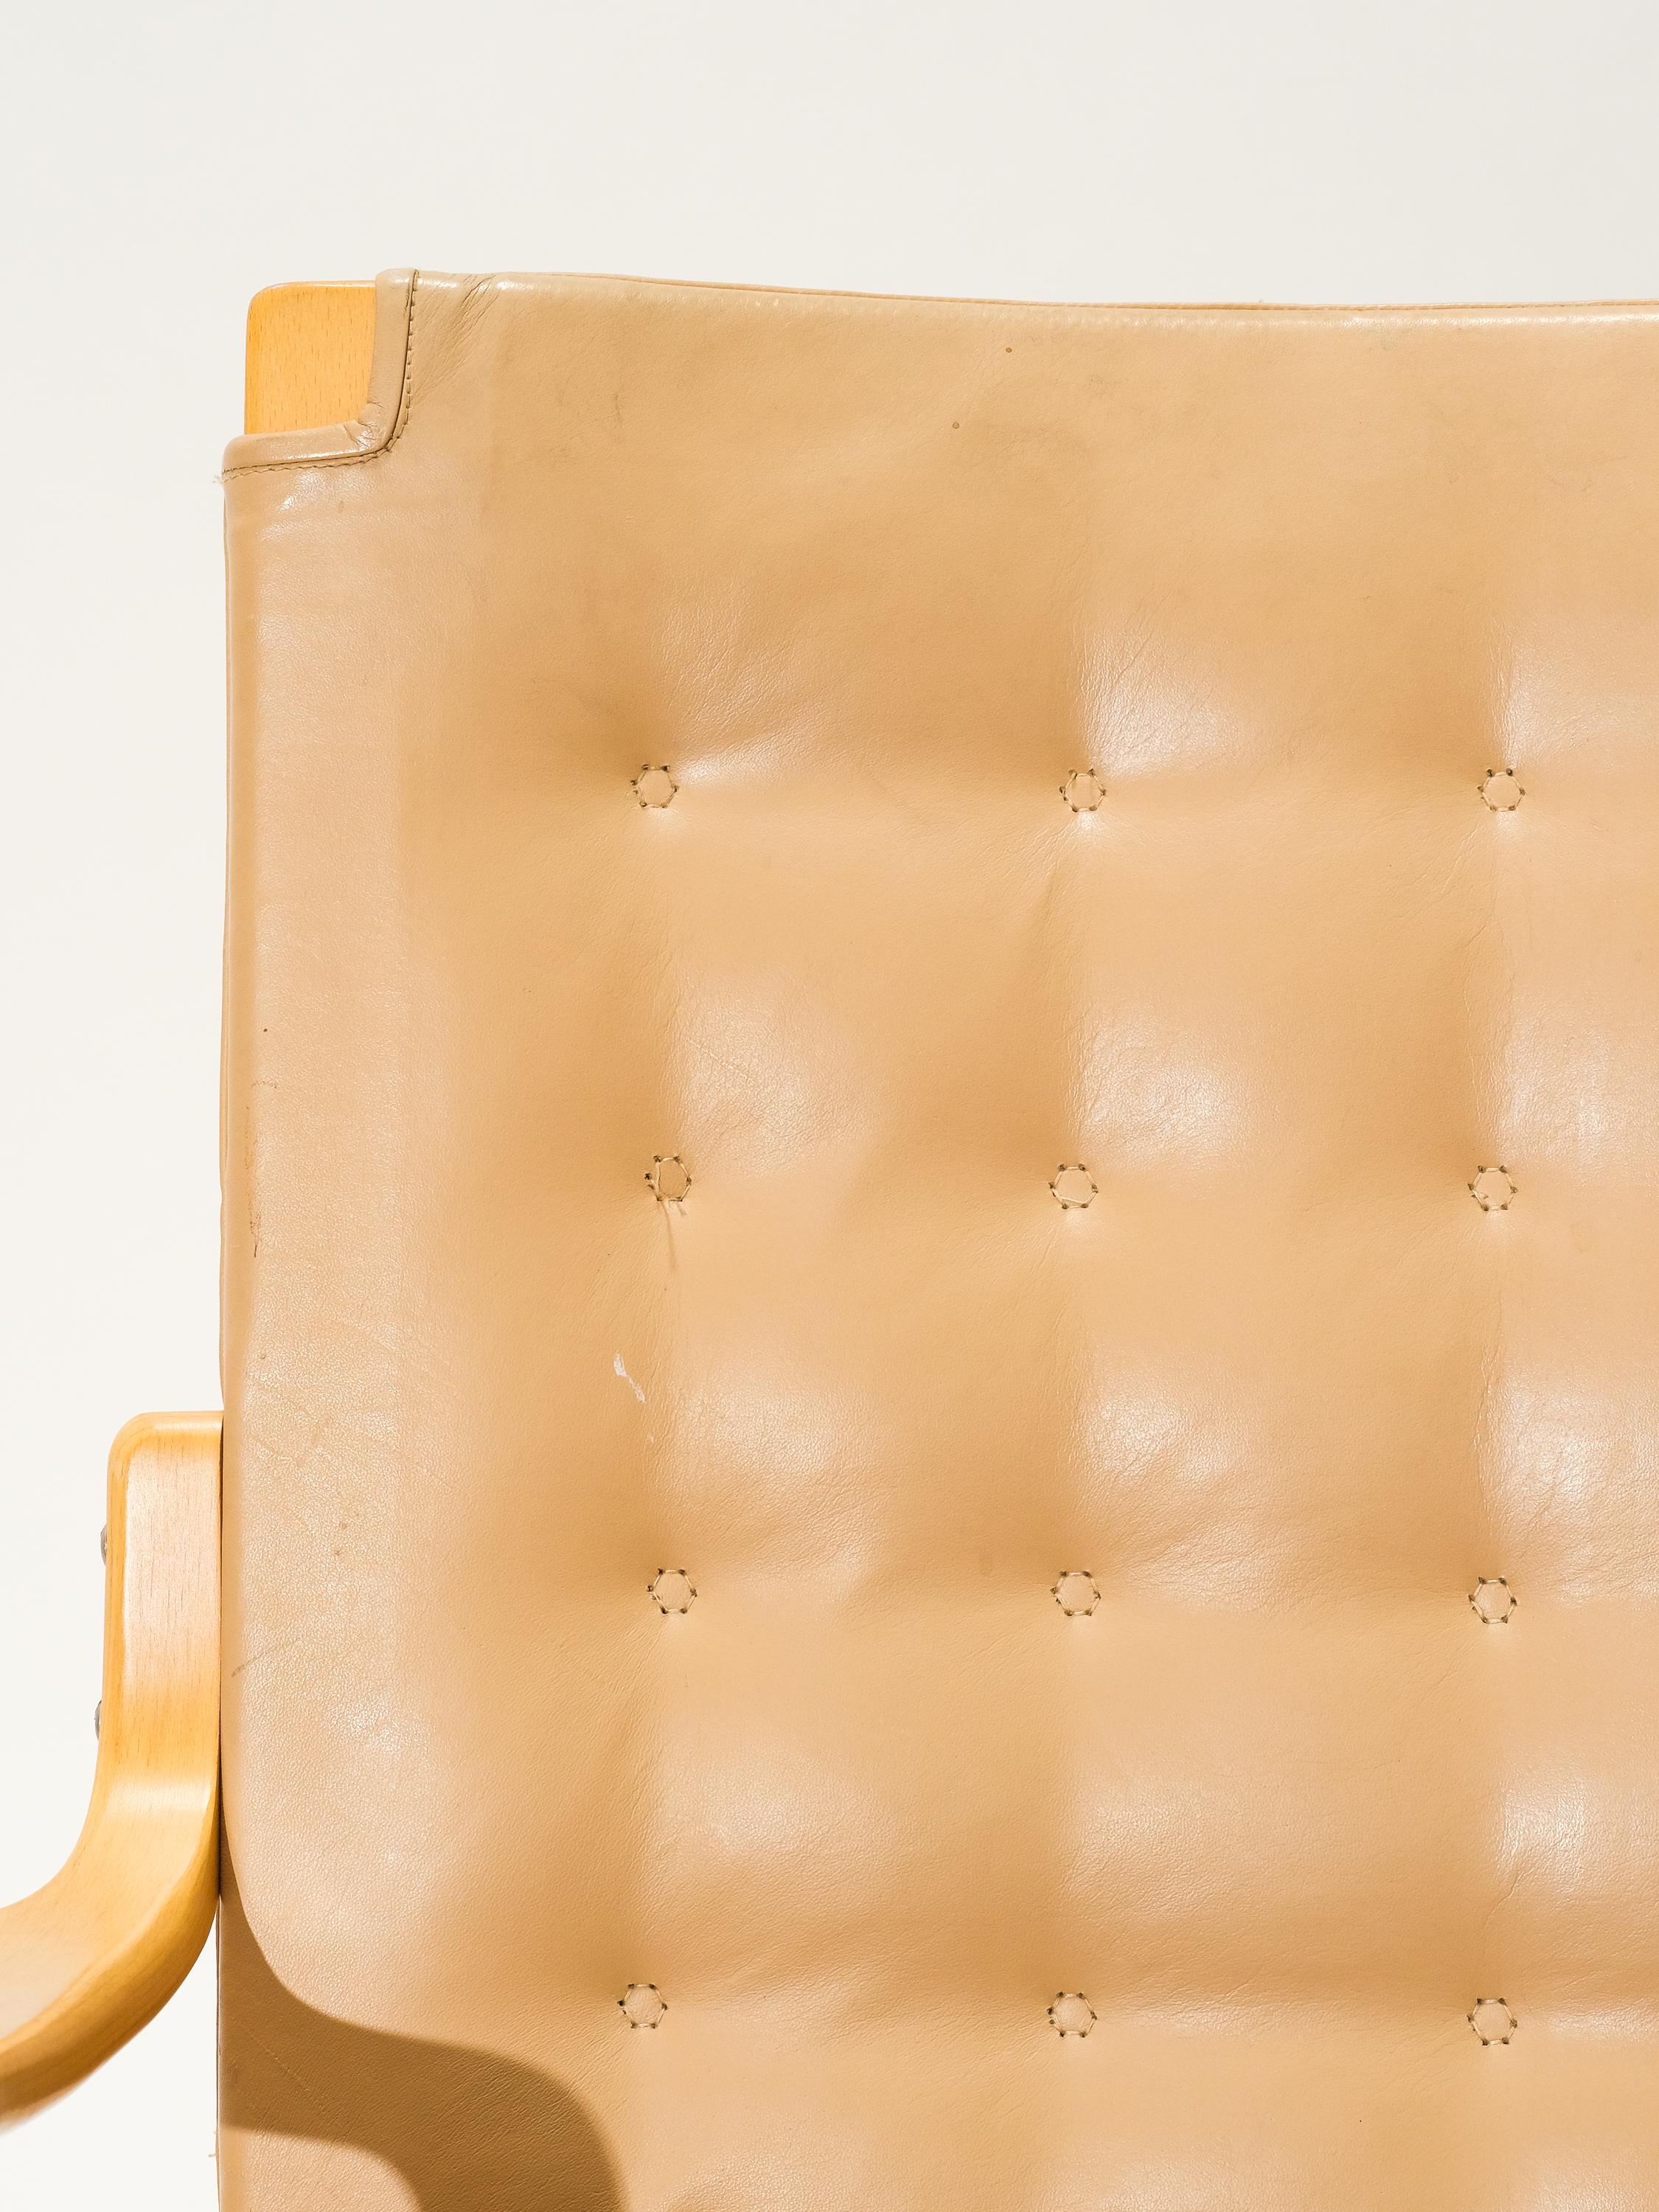 Leather Mid-Century 'Mina' Lounge / Arm Chair by Bruno Mathsson, Sweden, 1950s For Sale